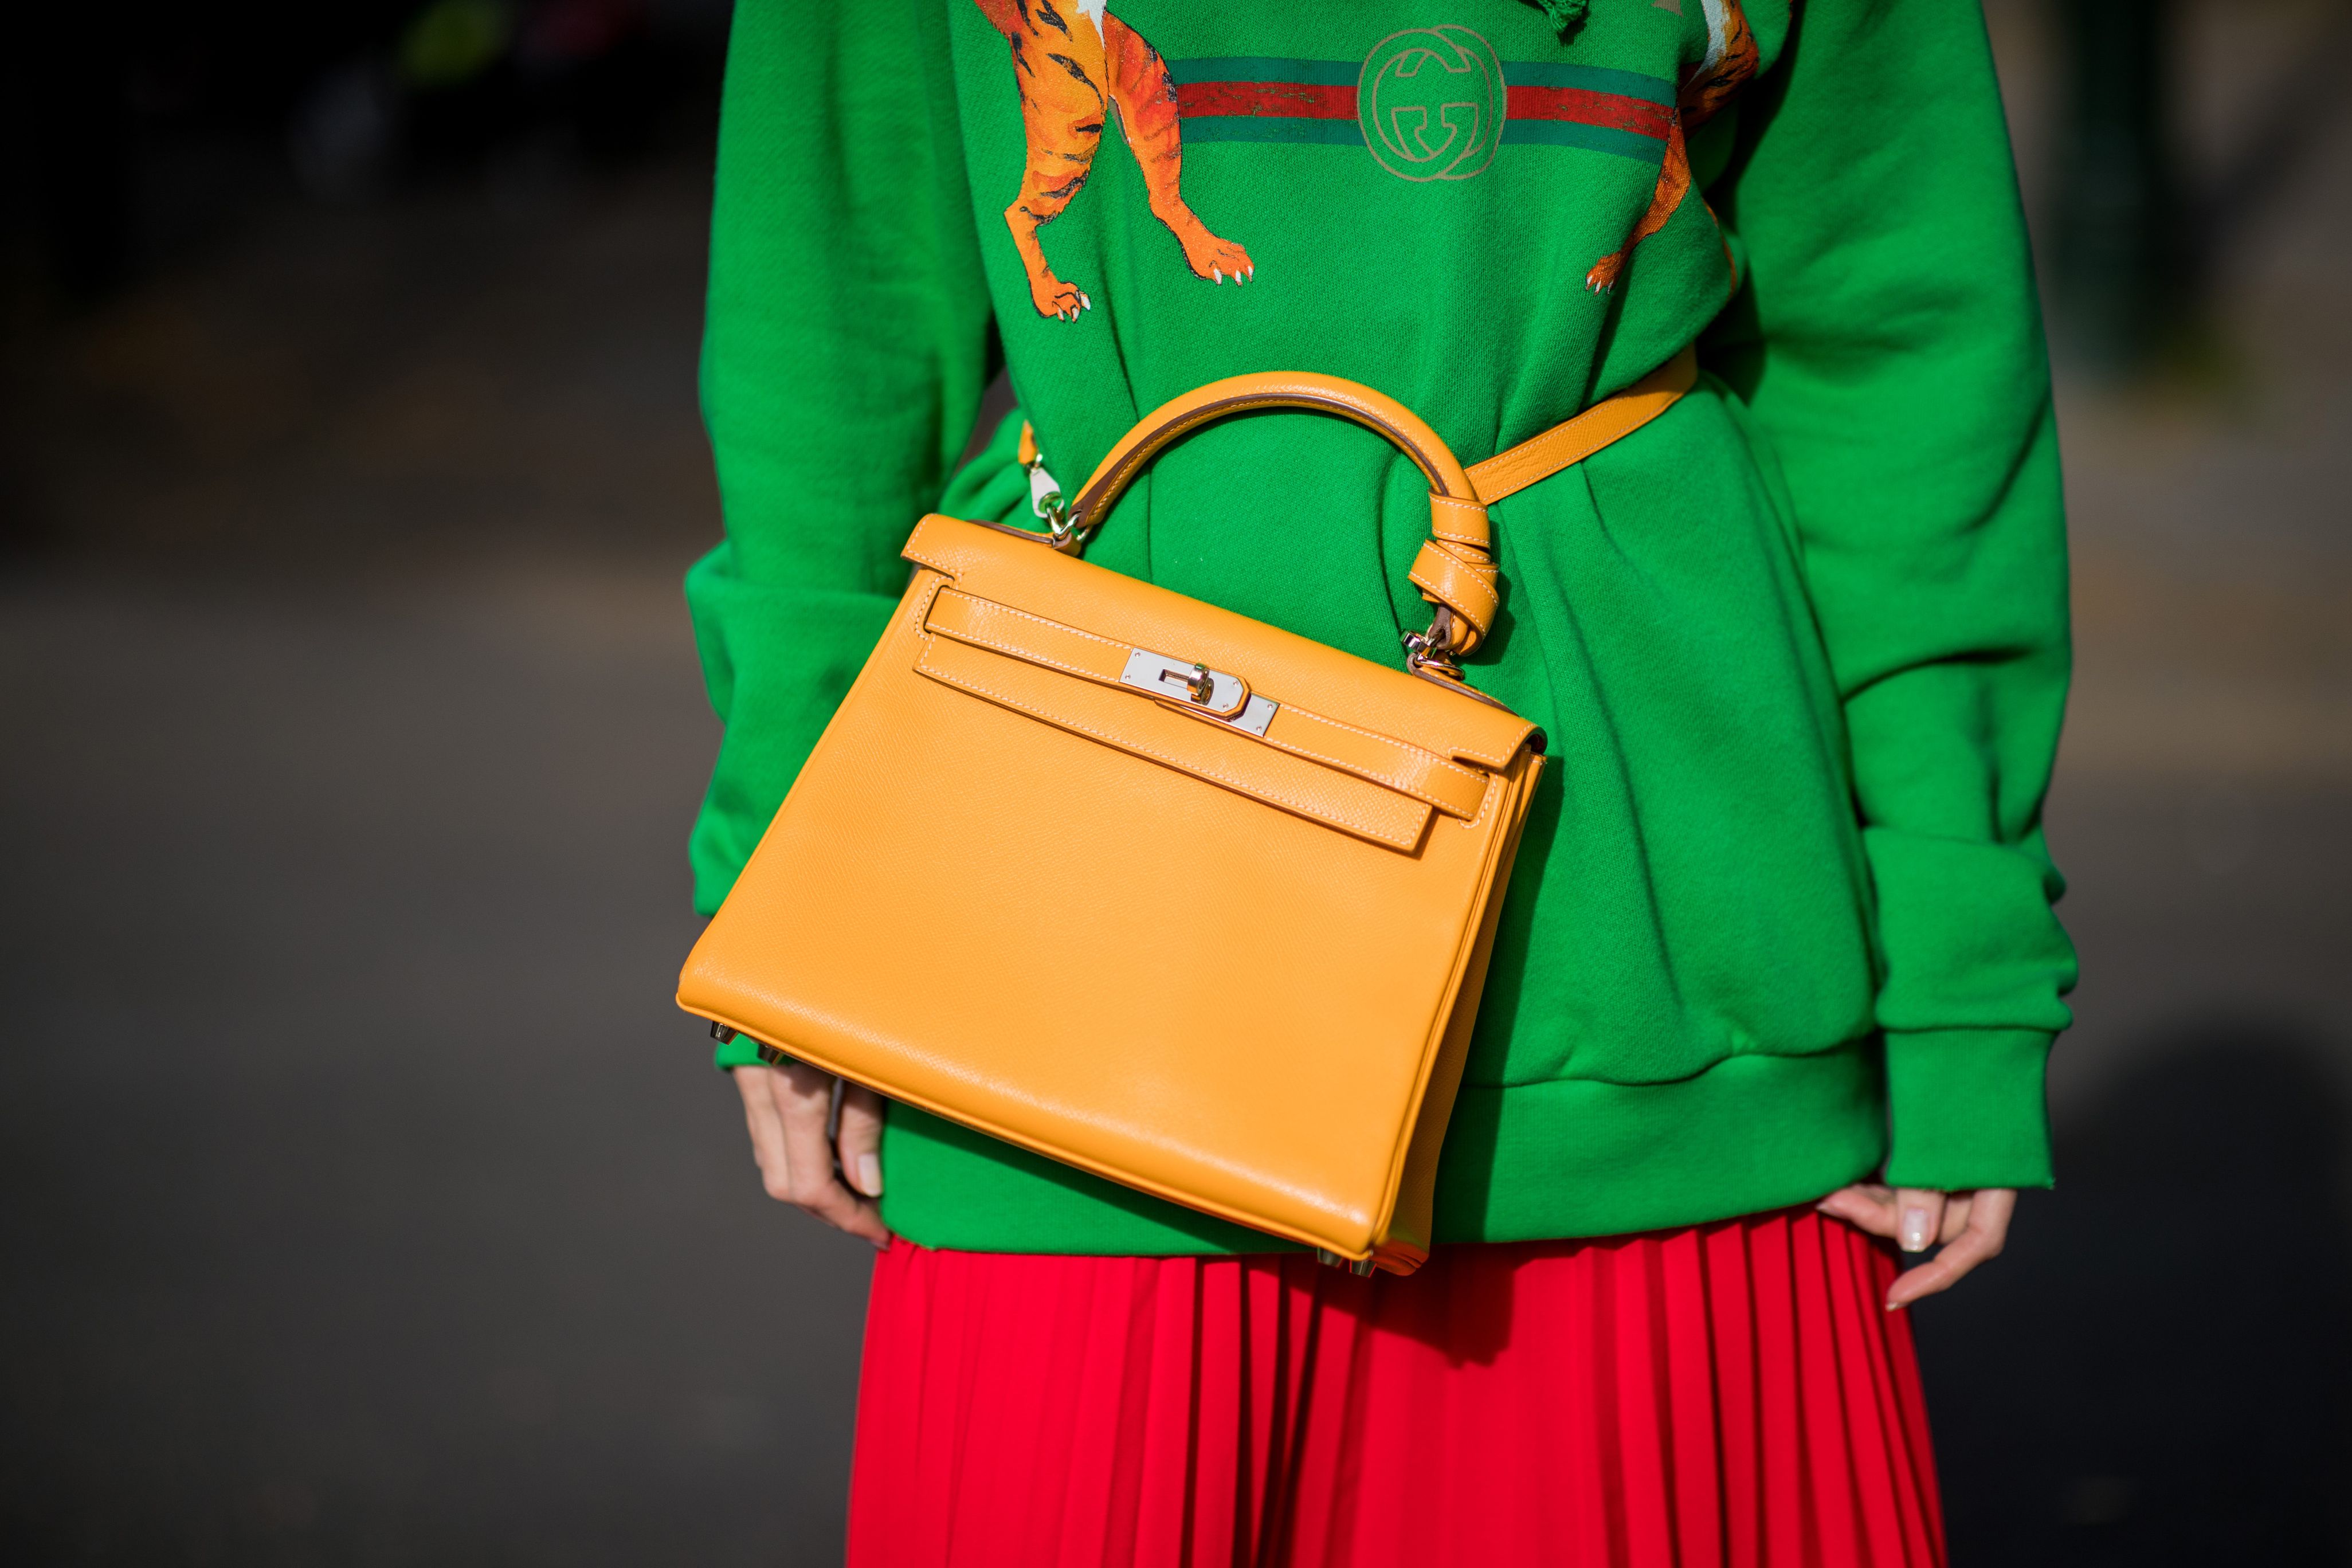 Sotheby’s brings you the best of Hermès handbags through its one-of-a-kind live auction